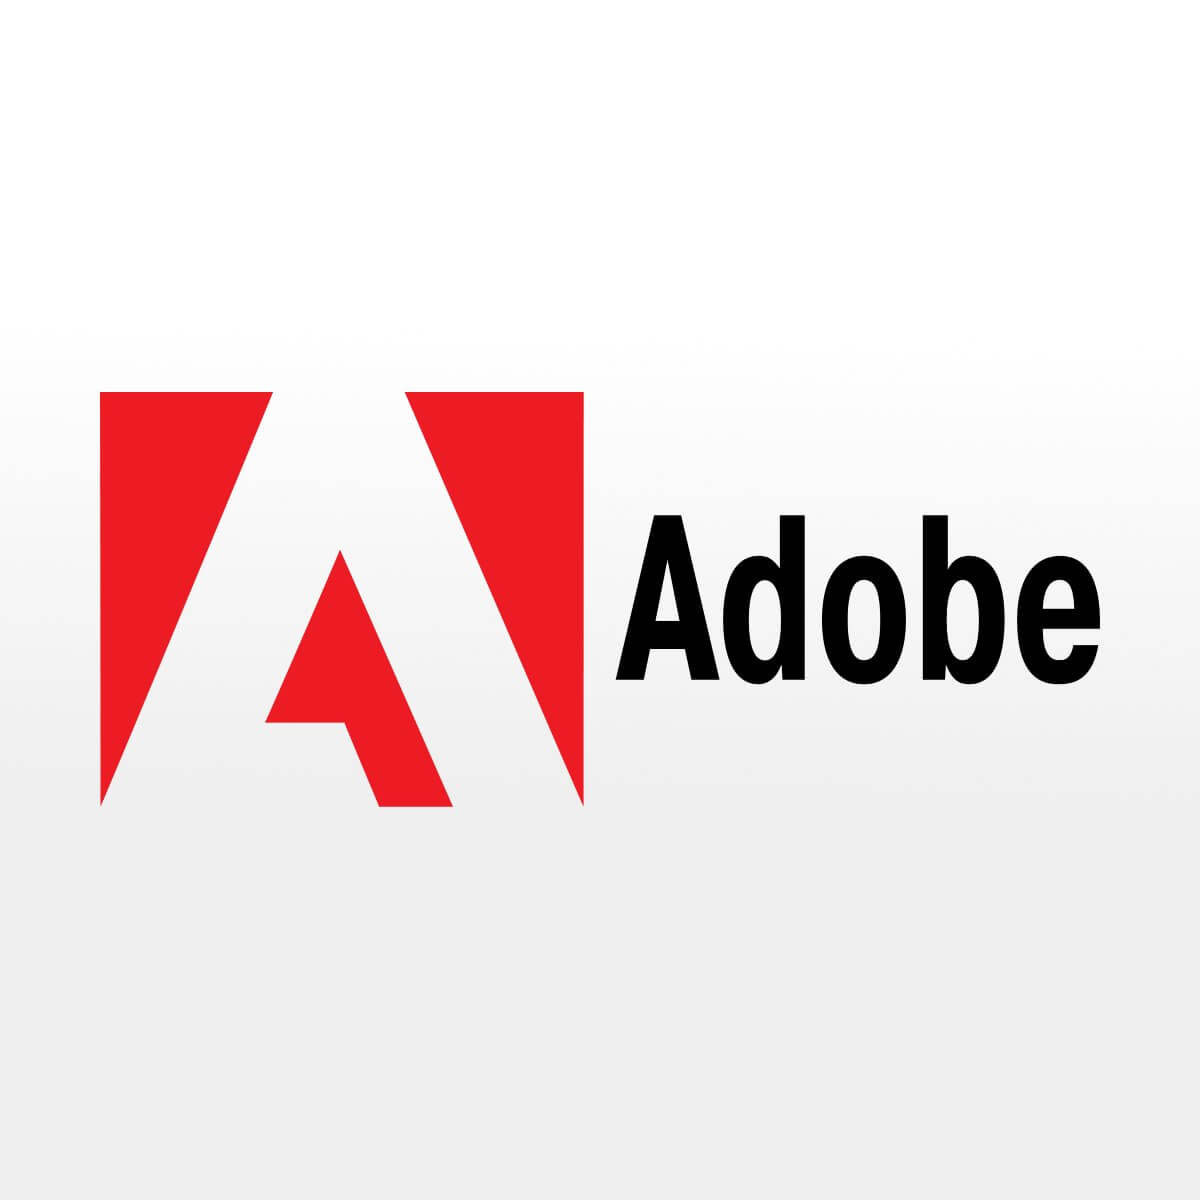 There was a problem connecting to Adobe online